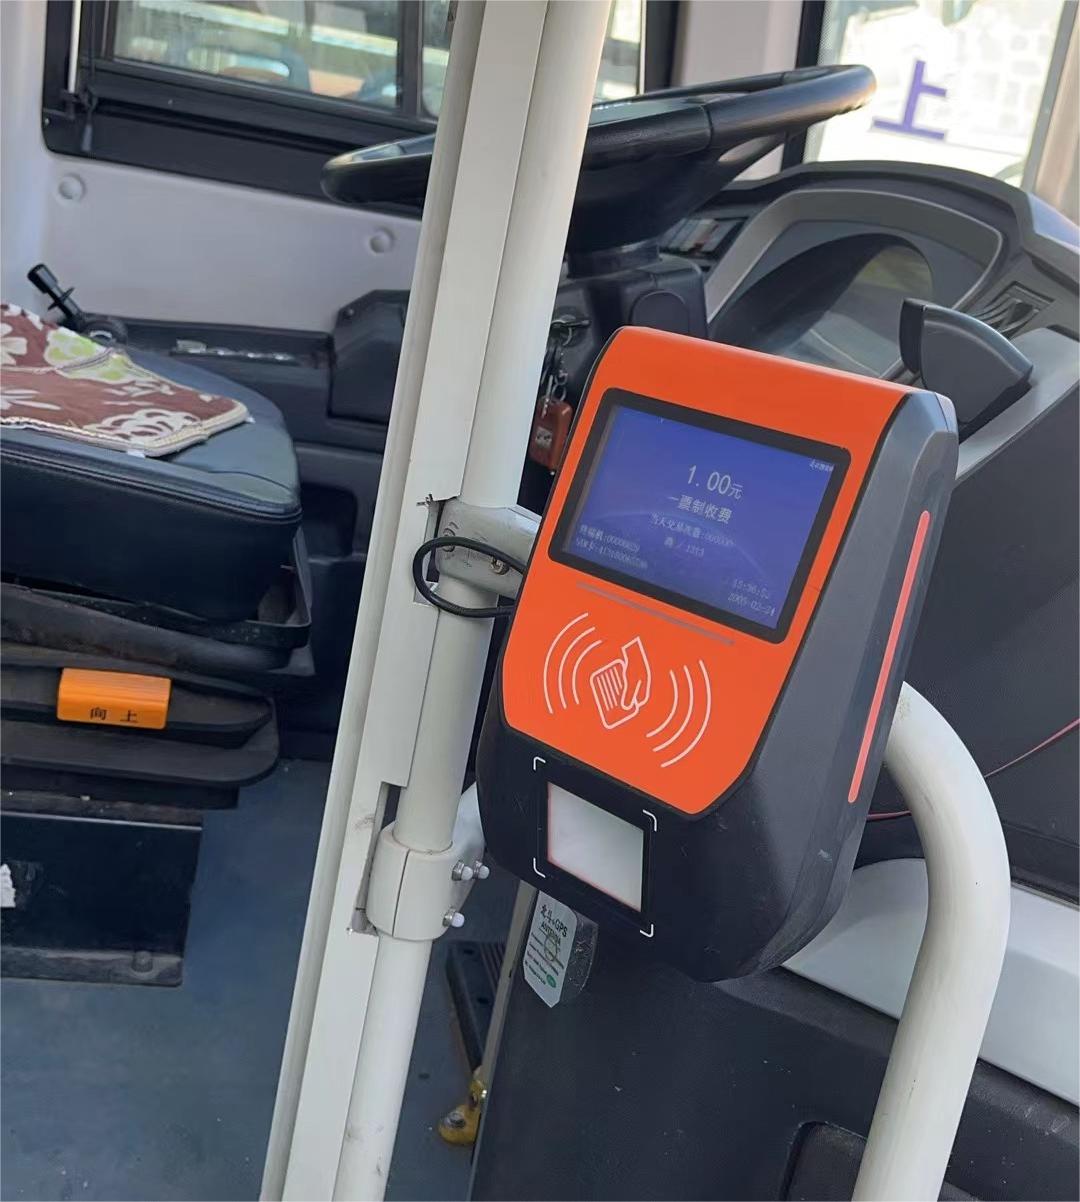 Are you a customer of bus card readers?